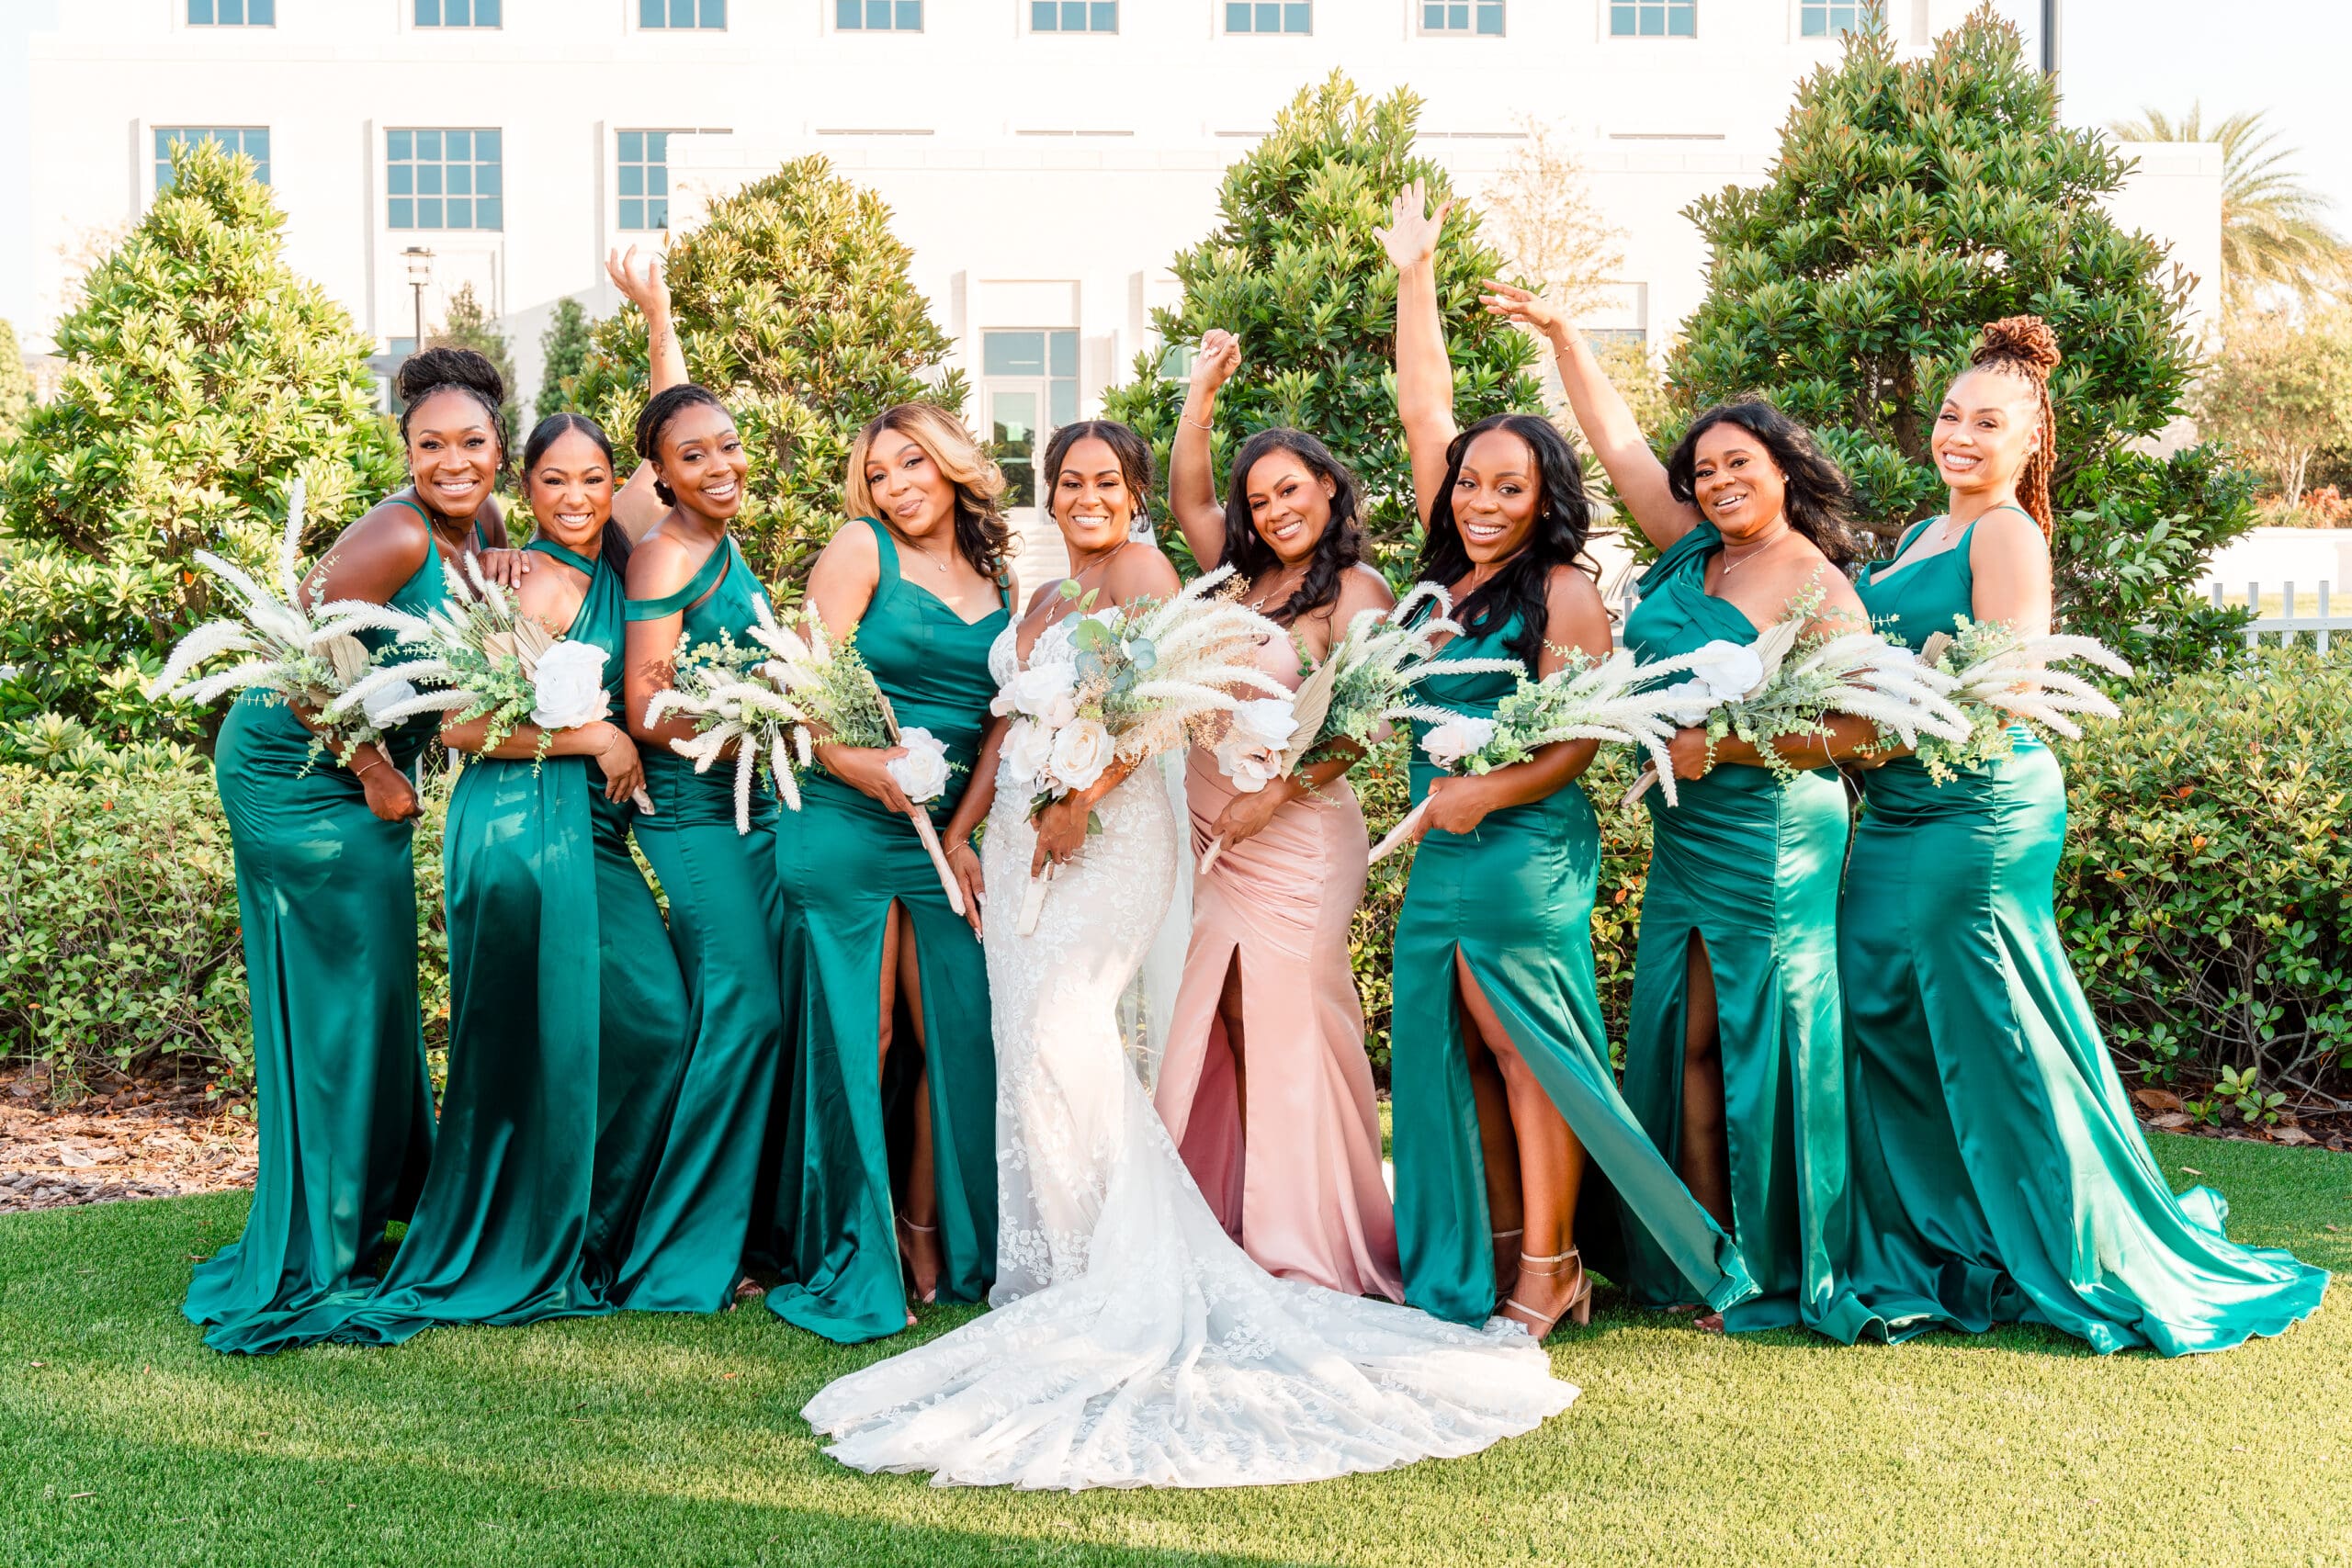 Lateisha and her bridesmaids in green dresses posing together for a celebratory photo